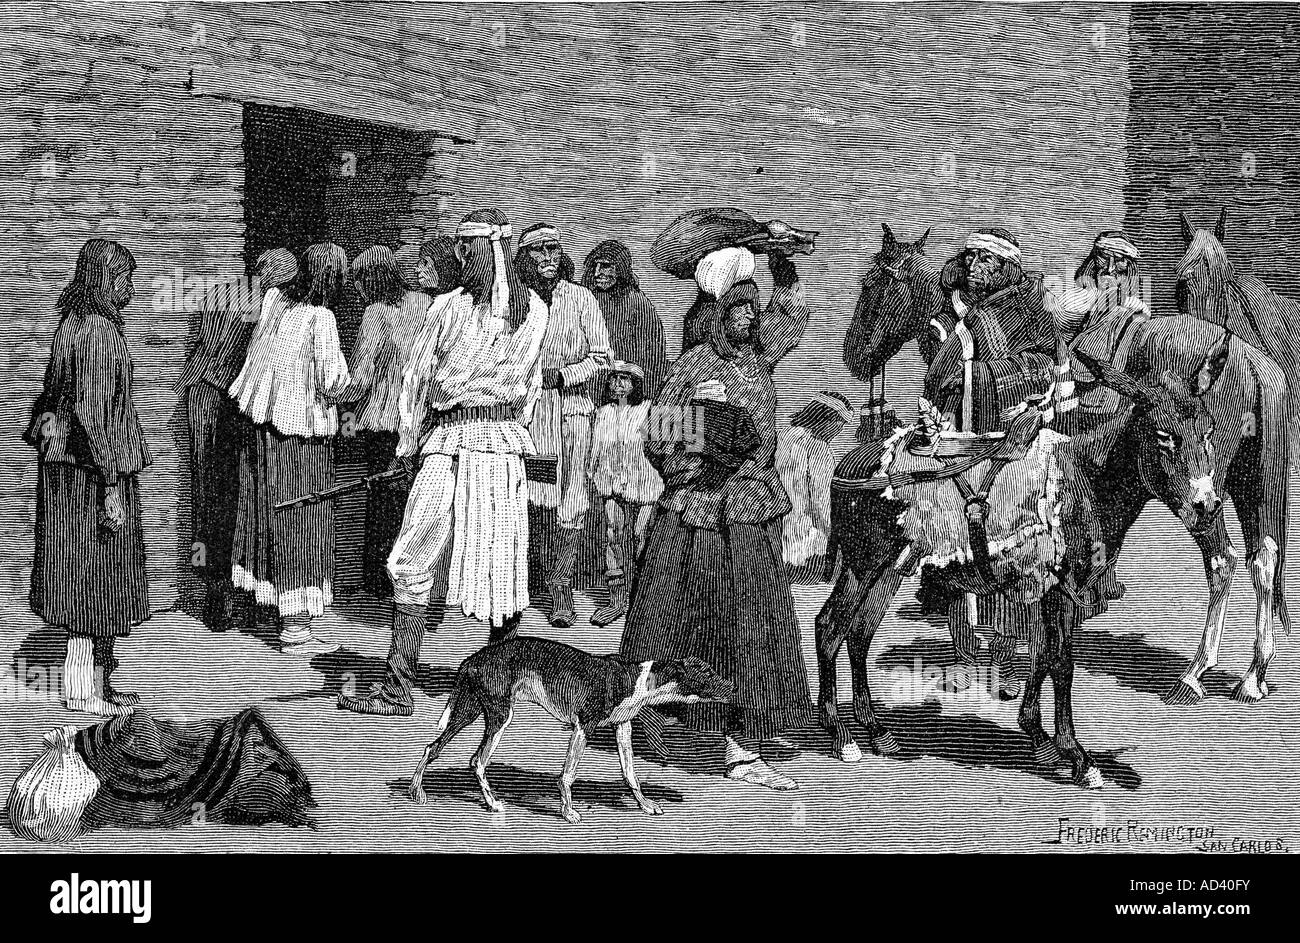 geography/travel, USA, people, Native Americans, reservation, San Carlos, Arizona, distribution of meat, engraving after Frederc Remington (1861 - 1909), Apache, famine, misery, North America, American Indians, 19th century, historic, historical, Stock Photo